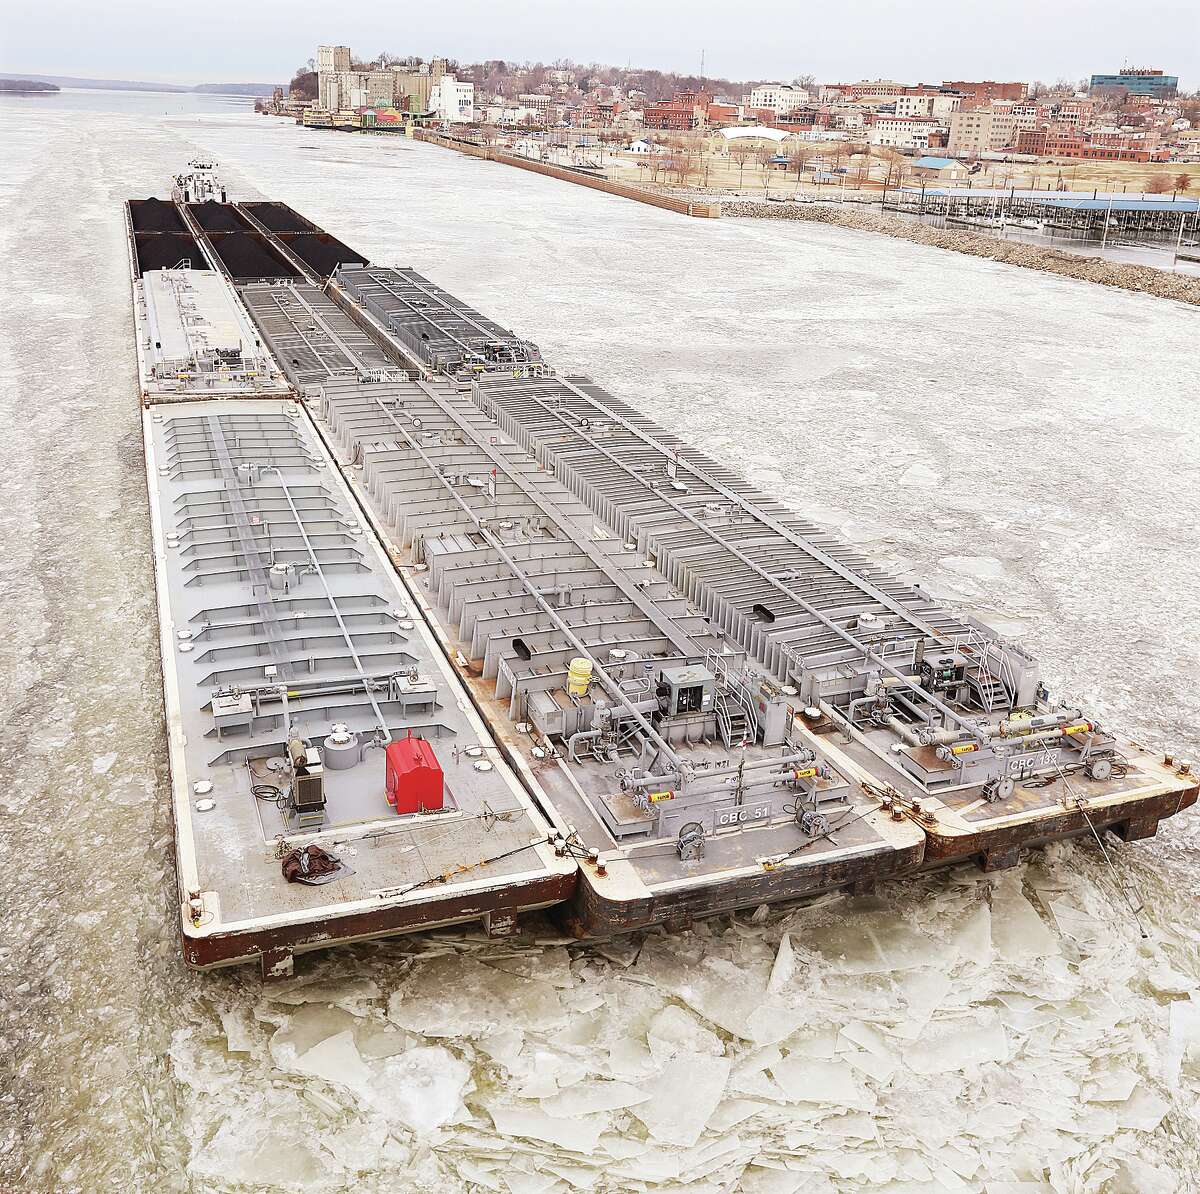 John Badman|The Telegraph A towboat and barges carrying liquified petroleum gas and coal break through the Mississippi River ice near Alton Monday morning just before crossing under the Clark Bridge on its way downstream to the Melvin Price Locks and Dam 26. Cargo on the river changes with the seasons. The U.S. Energy Information Administration estimates 85 percent of the electricity generated in the United States this year will come from coal-fired power plants.